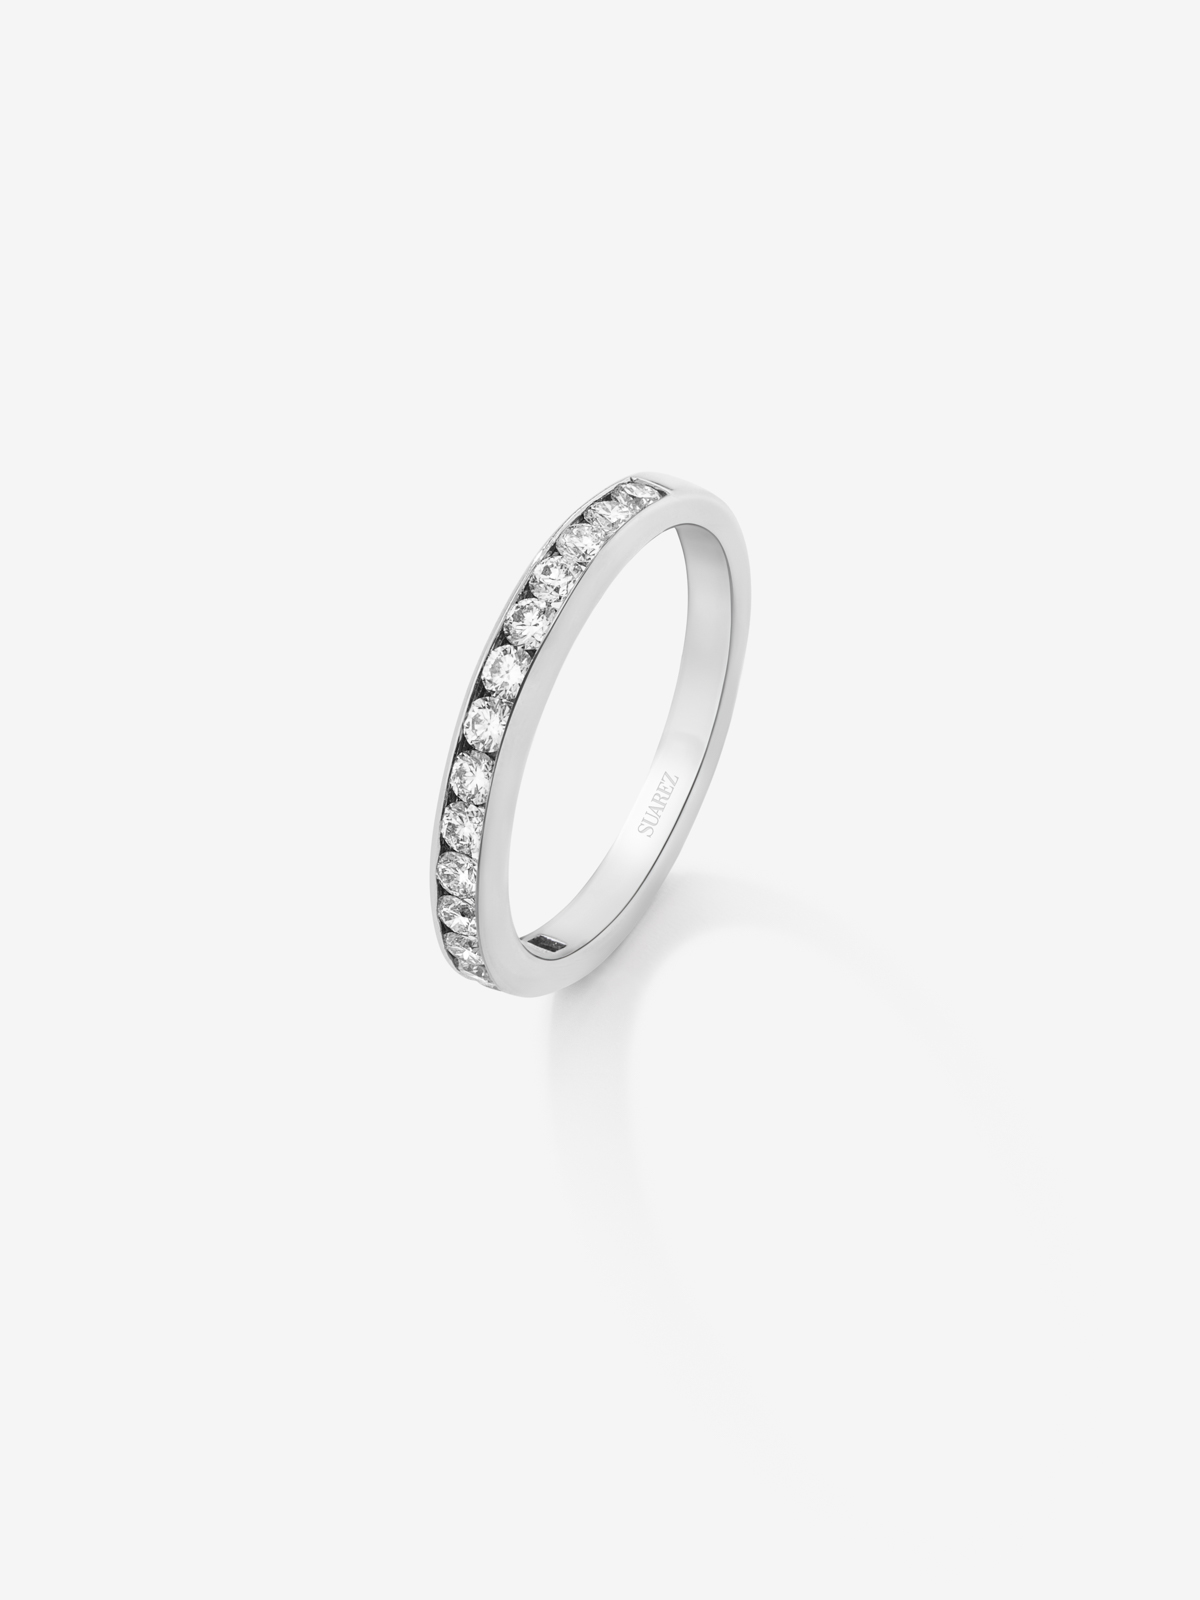 Half alliance 18K white gold engagement ring with diamonds on band.